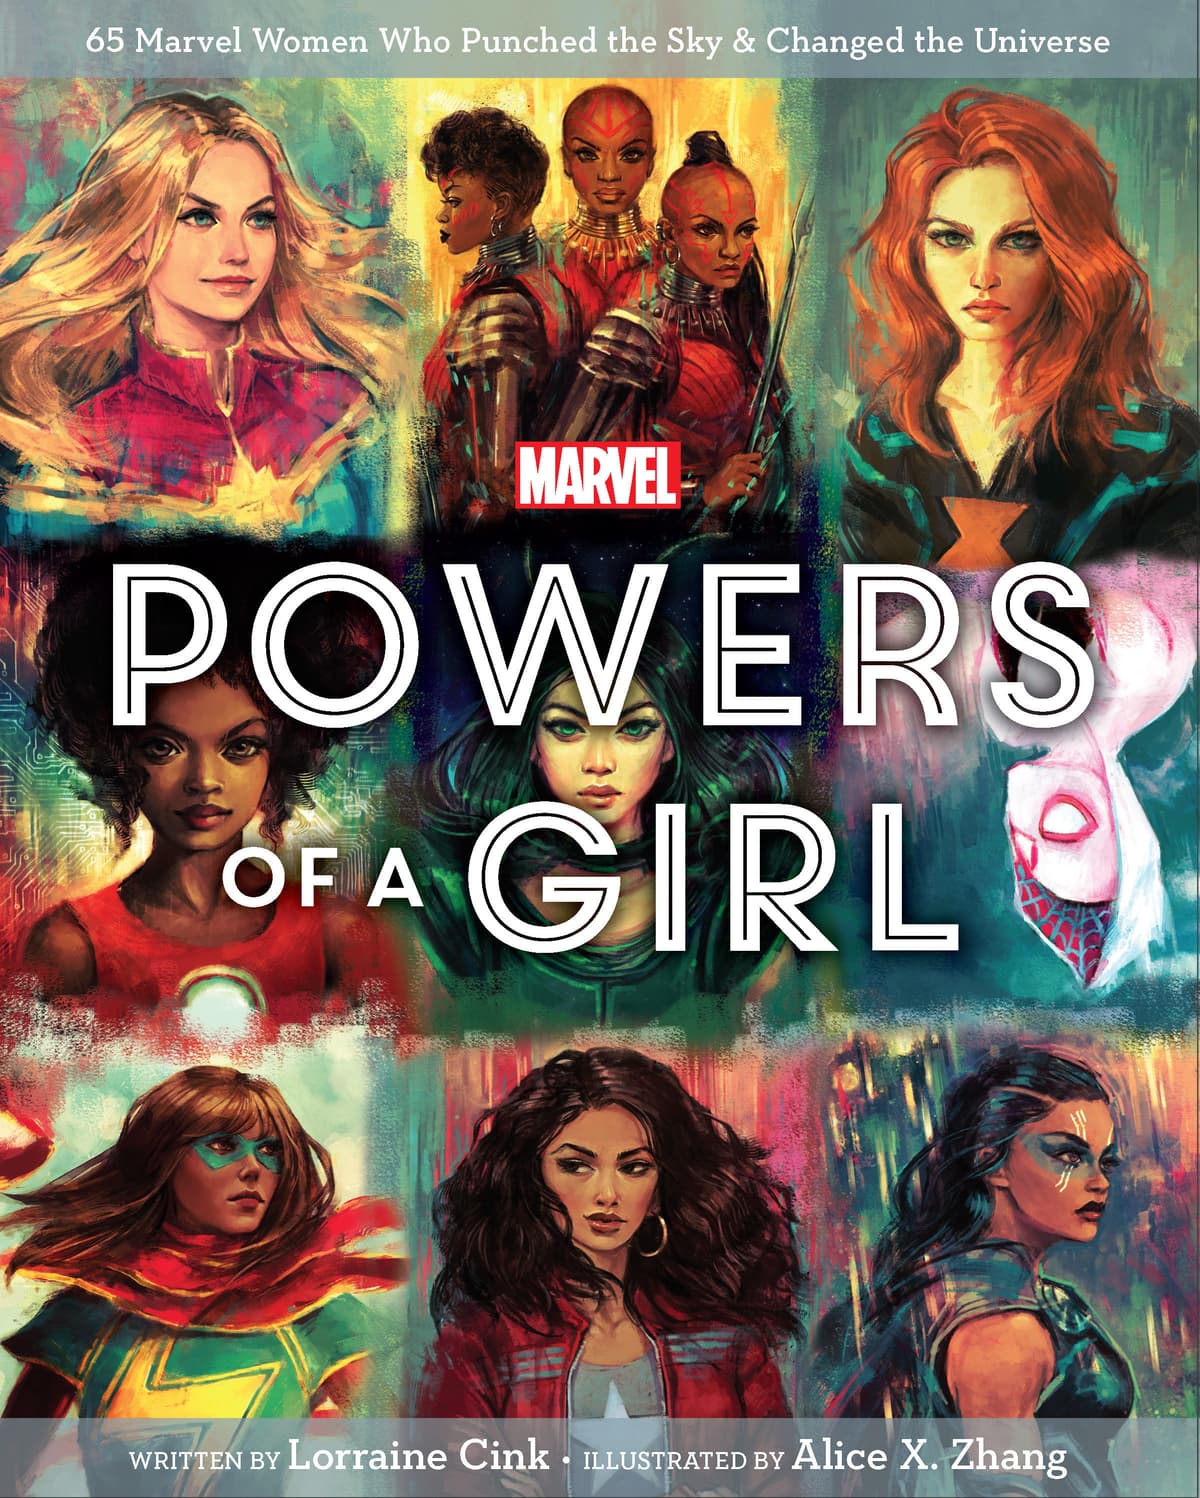 MARVEL: POWERS OF A GIRL Cover by Alice X. Zhang